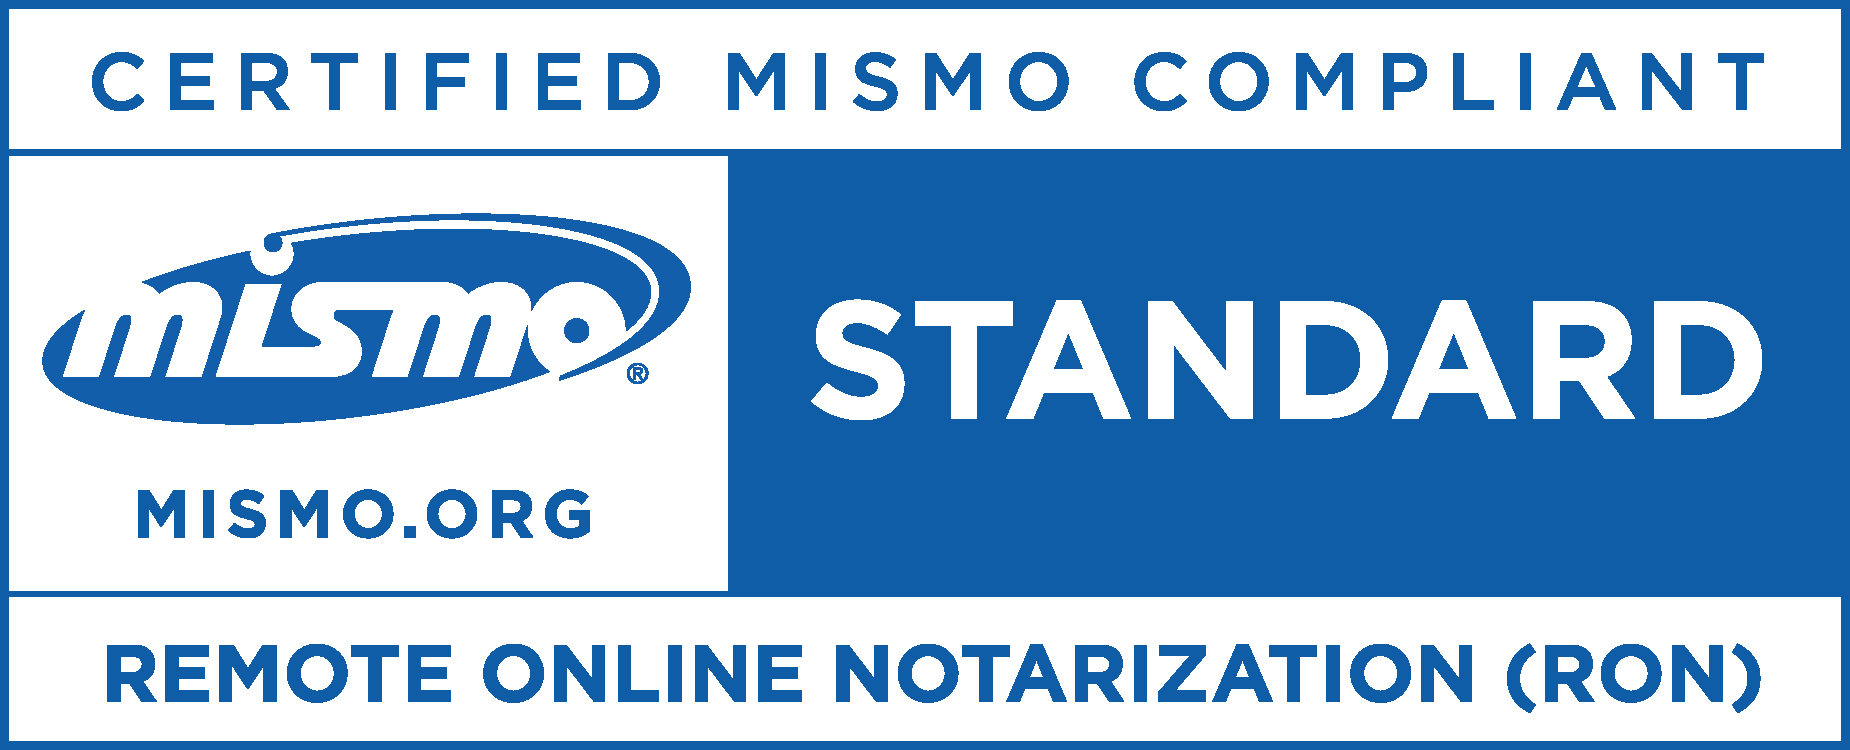 MISMO compliant certification for remote online notarization